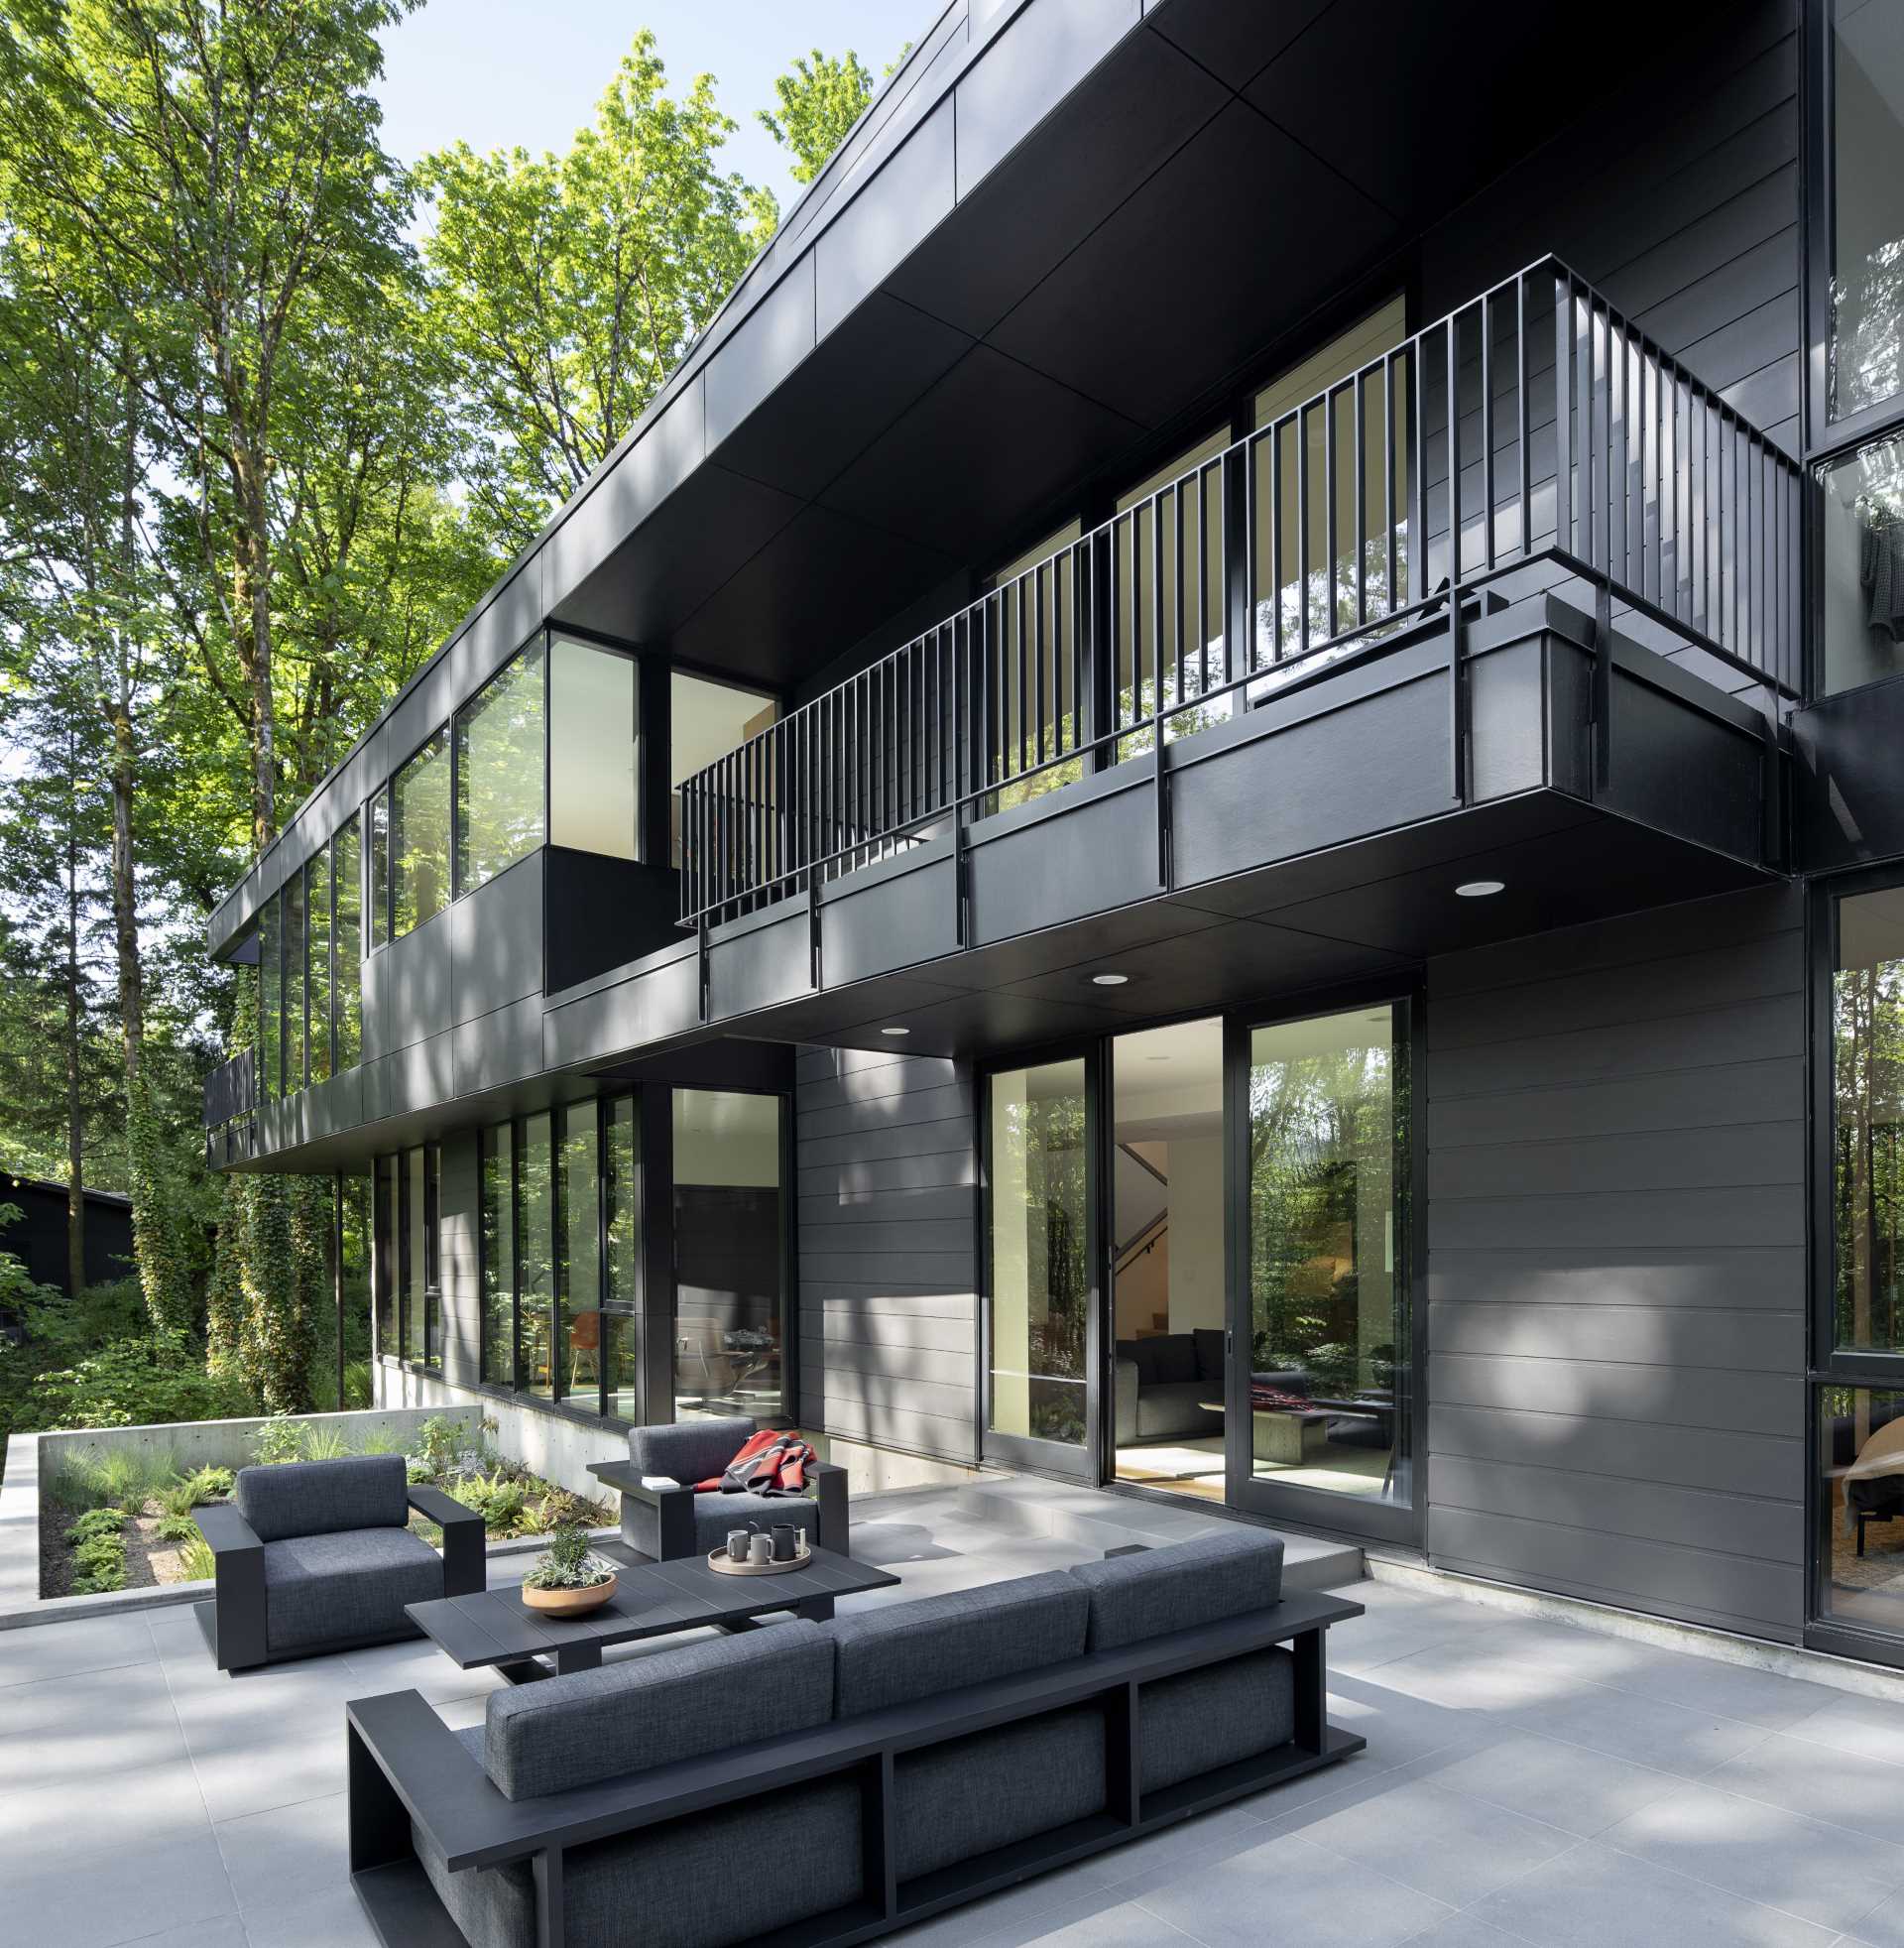 A modern black house with rooms that open to a patio furnished with outdoor furniture, and the forest beyond.